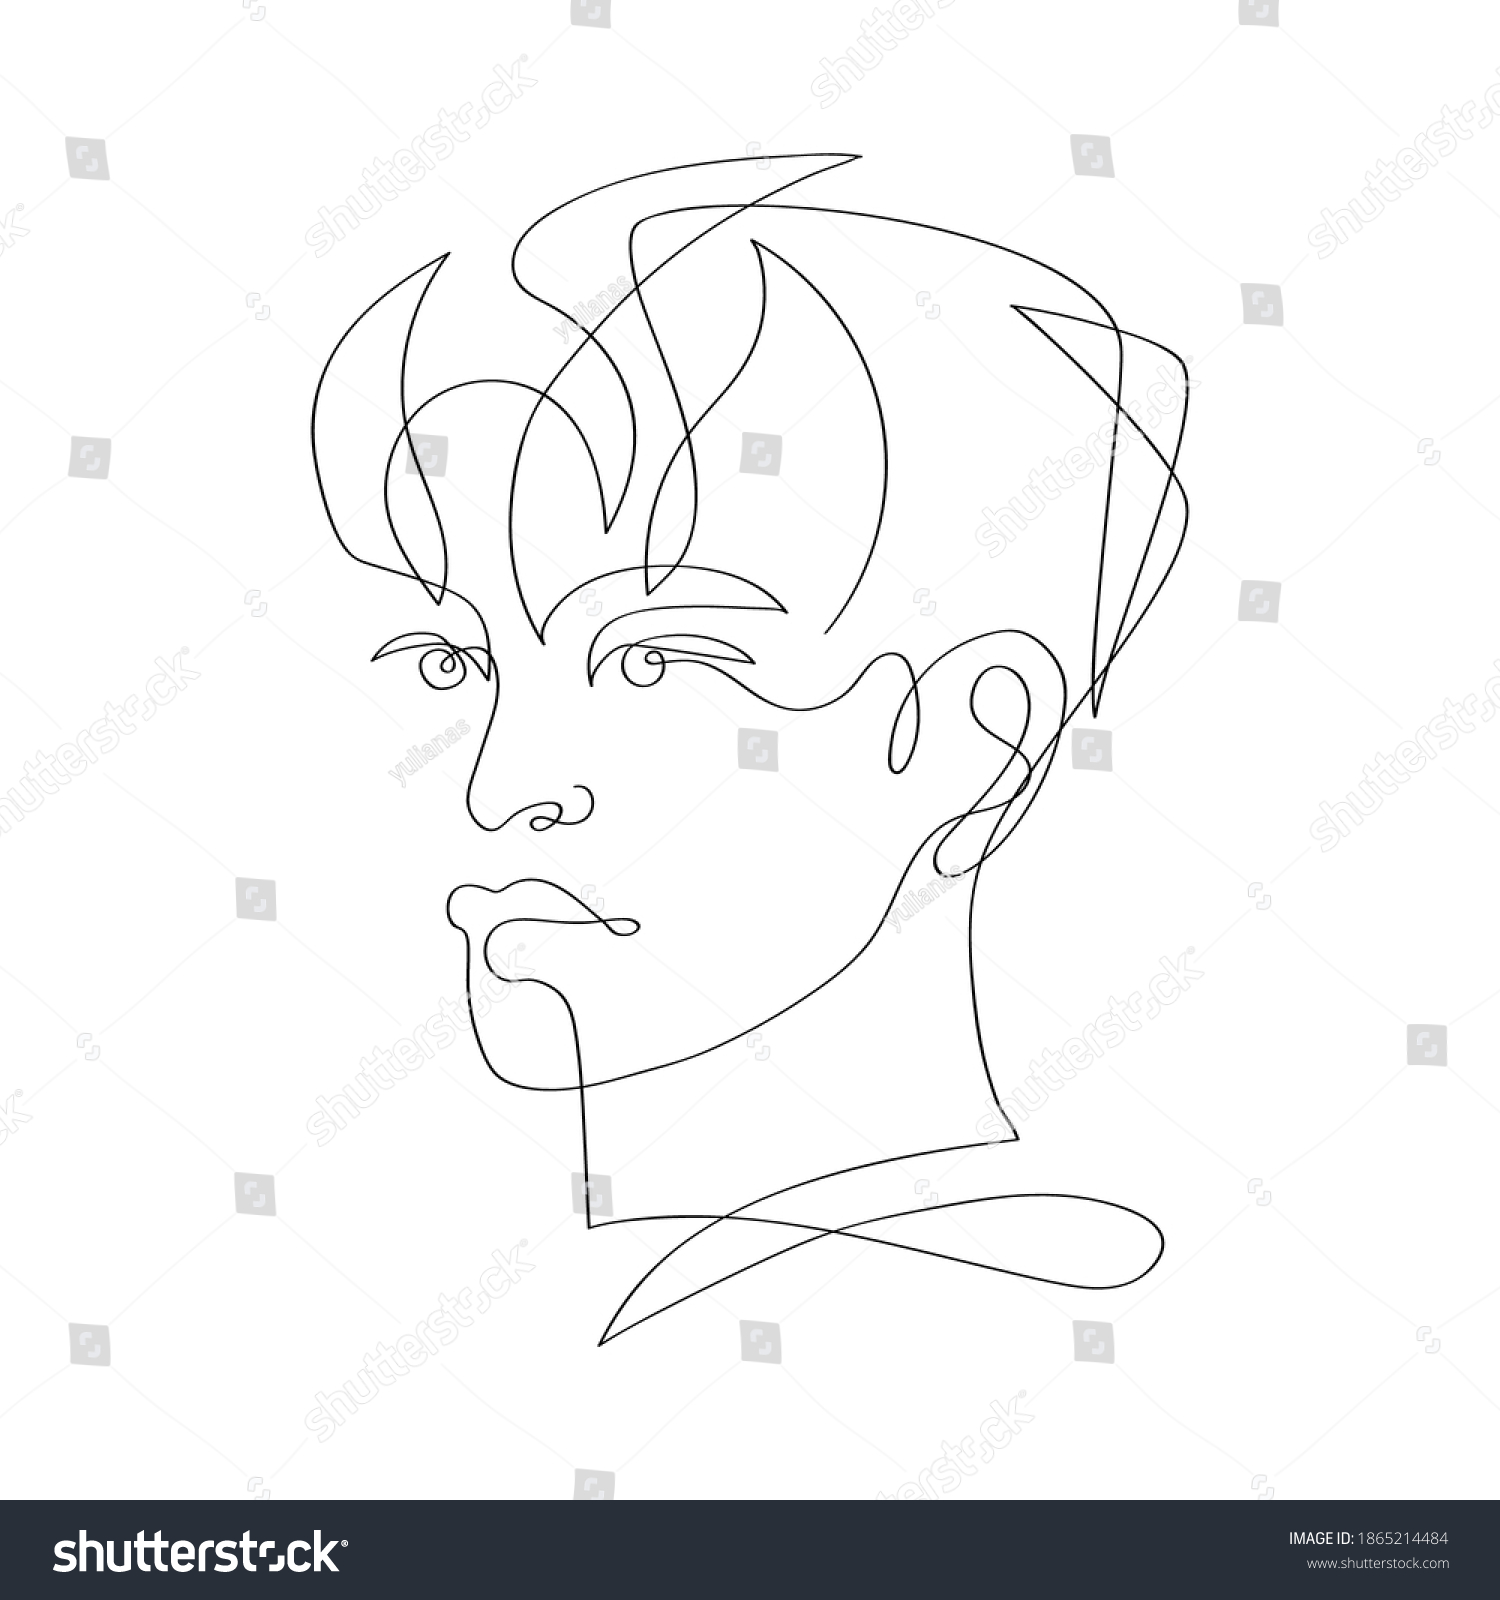 SVG of Continuous one line drawing. Abstract portrait of young man asian appearance in minimalist modern style.  svg